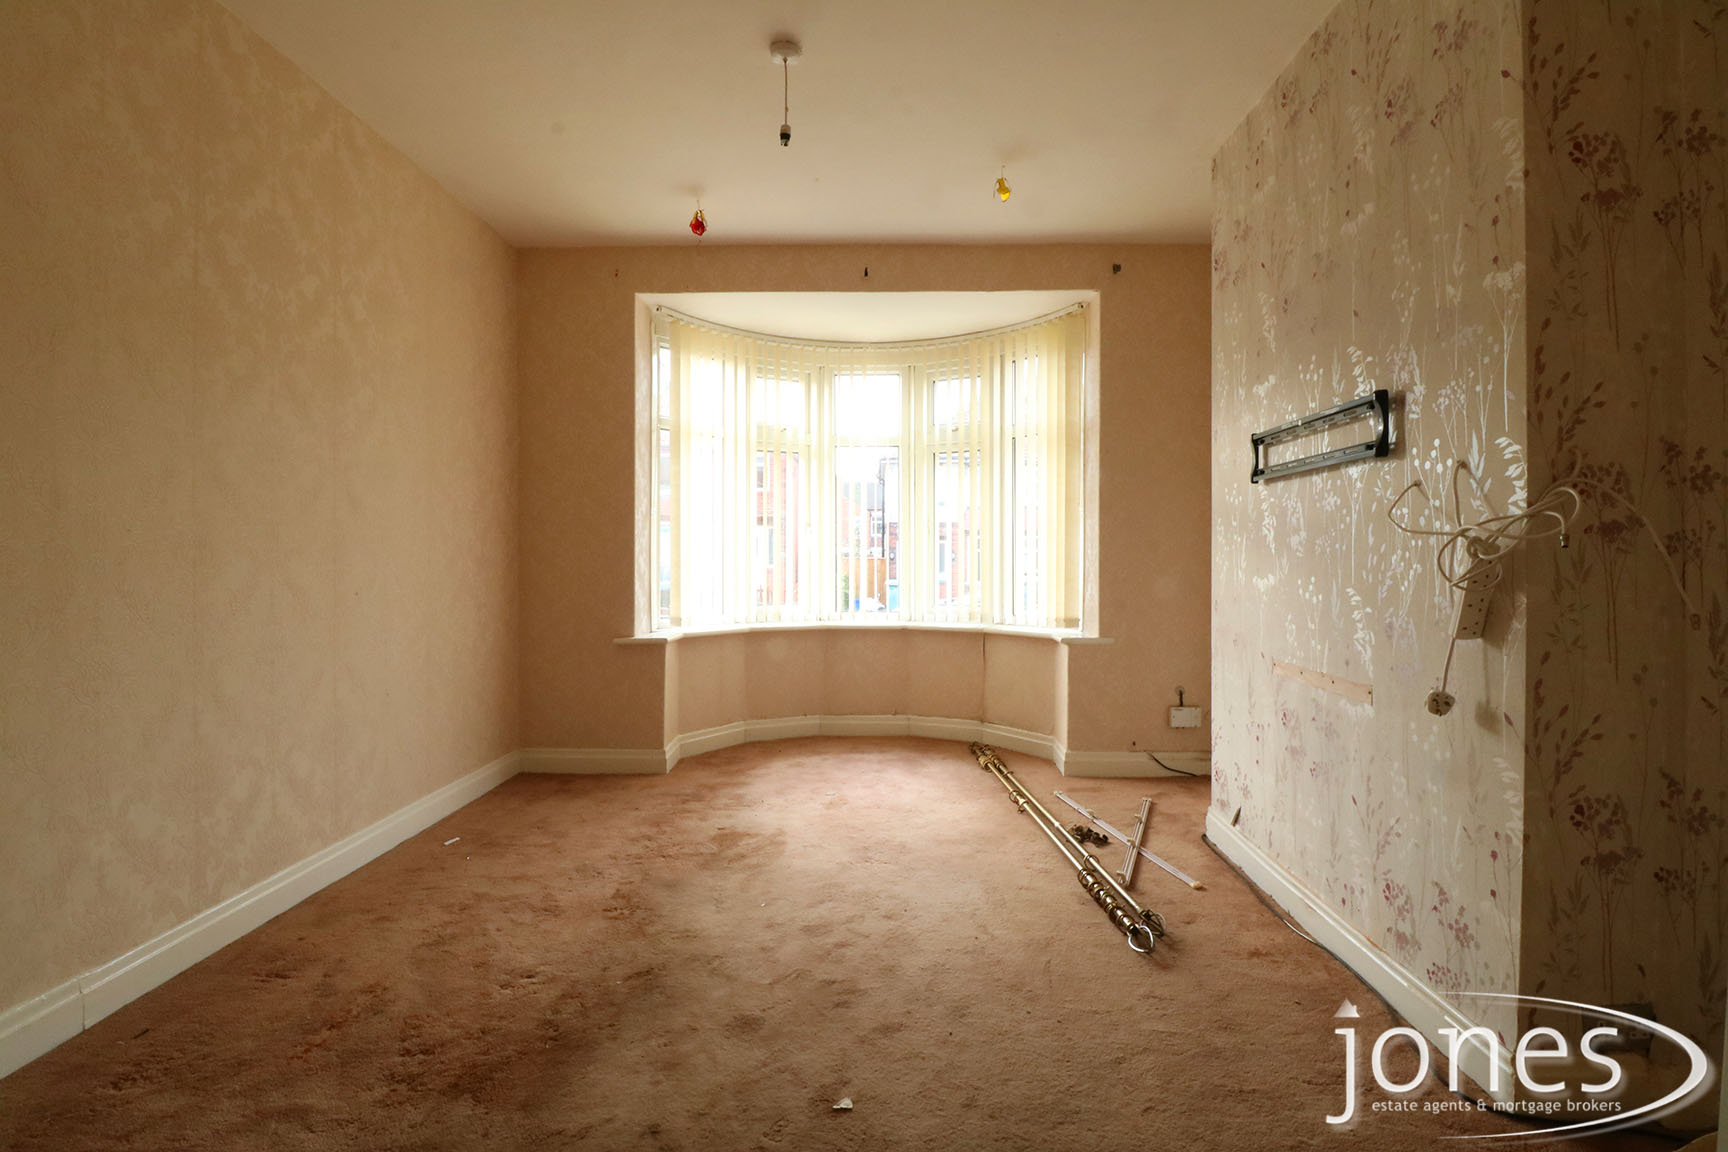 Home for Sale Let - Photo 02 Keithlands Avenue, Norton, Stockton on Tees, TS20